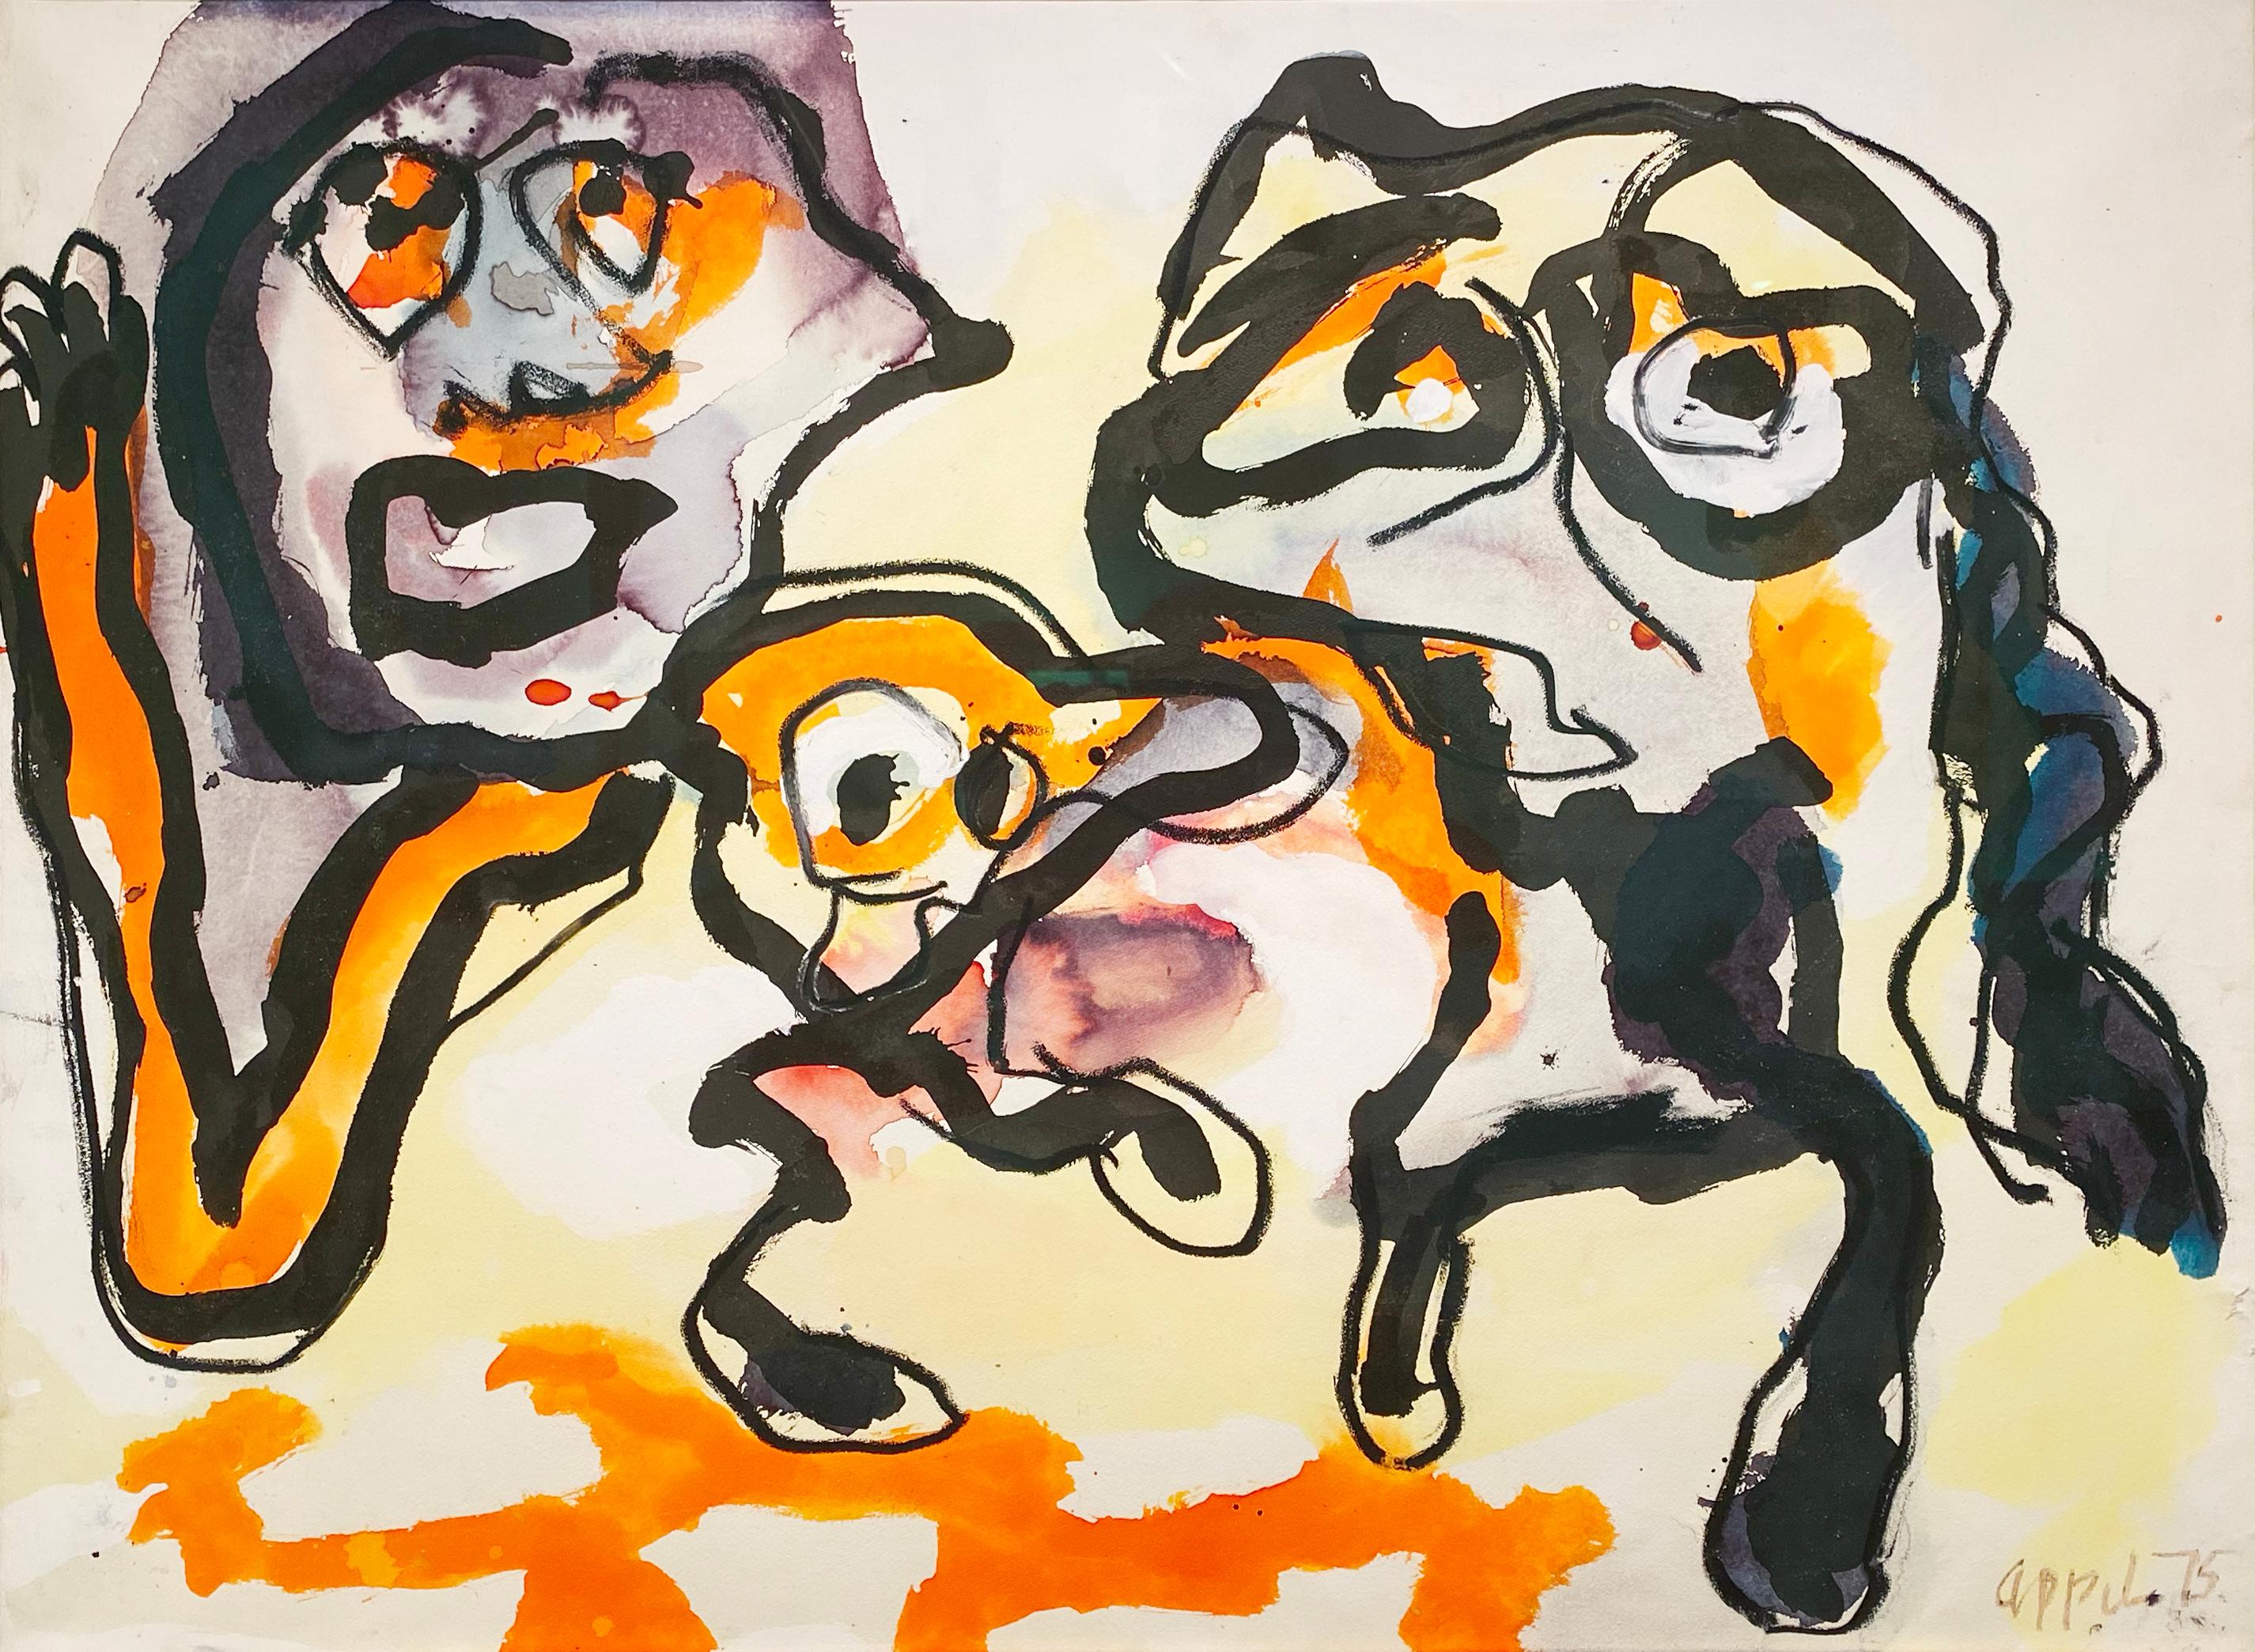 Figures, Abstracted Faces - Abstract Expressionist Painting by Karel Appel